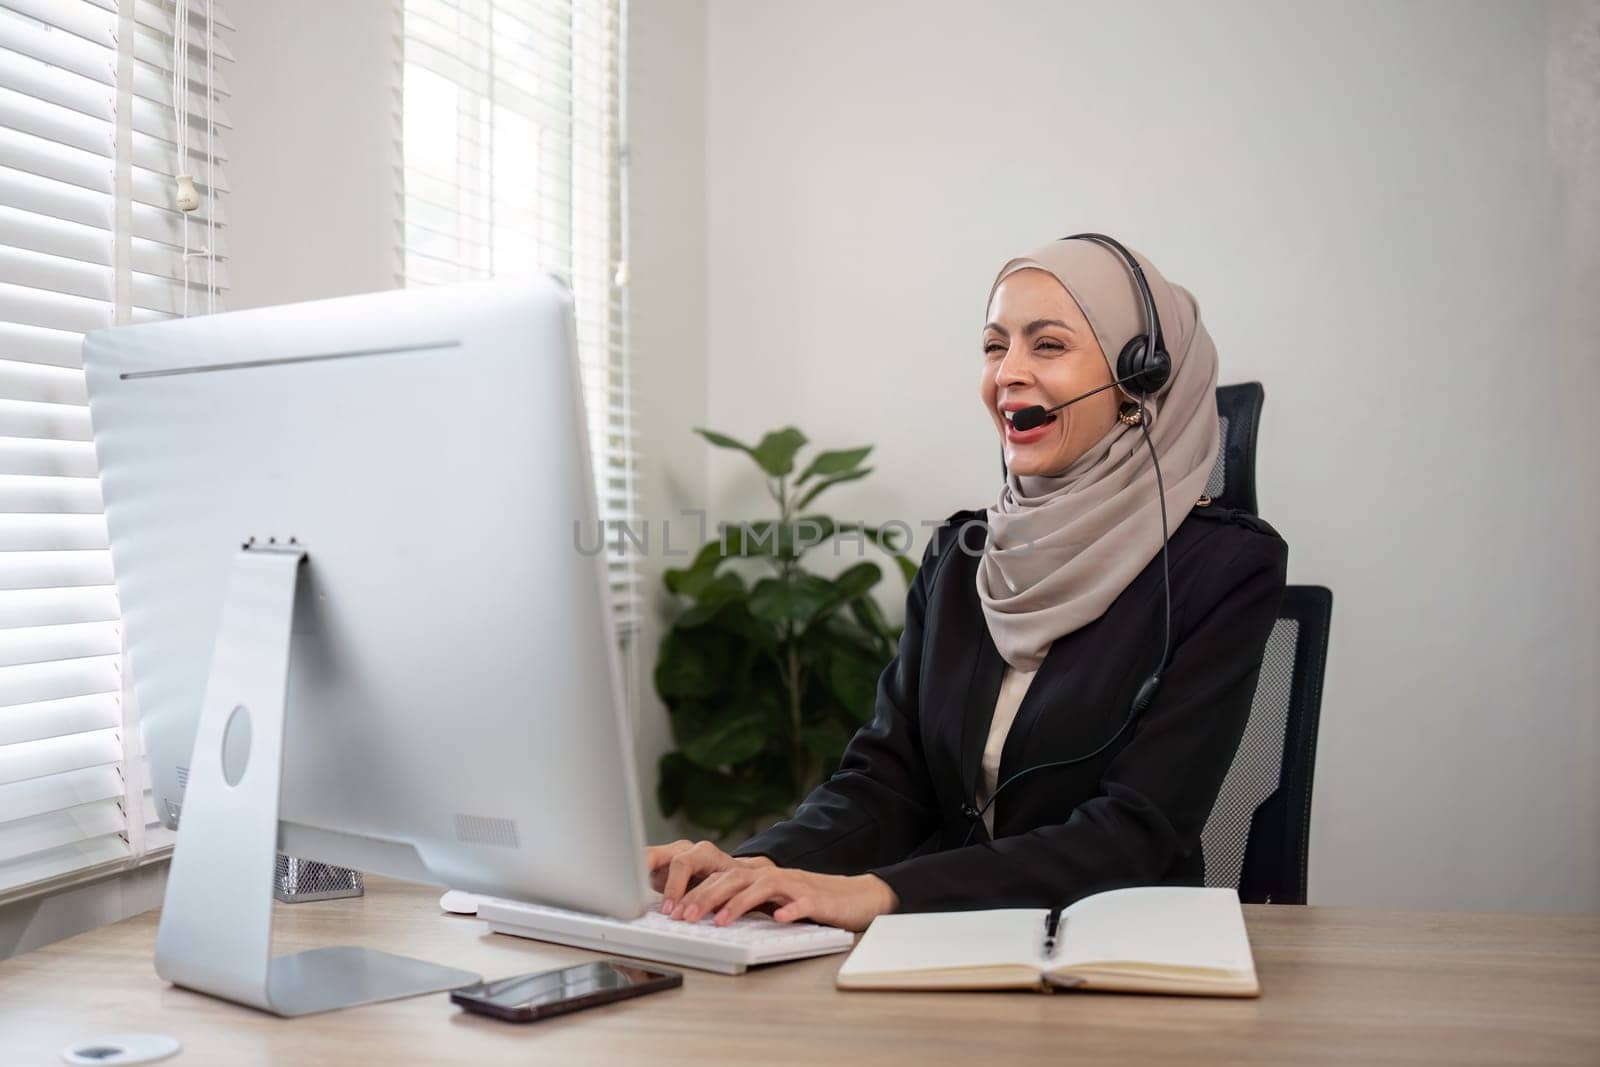 Young muslim women wearing hijab telemarketing or call center agent with headset working on support hotline at office by nateemee